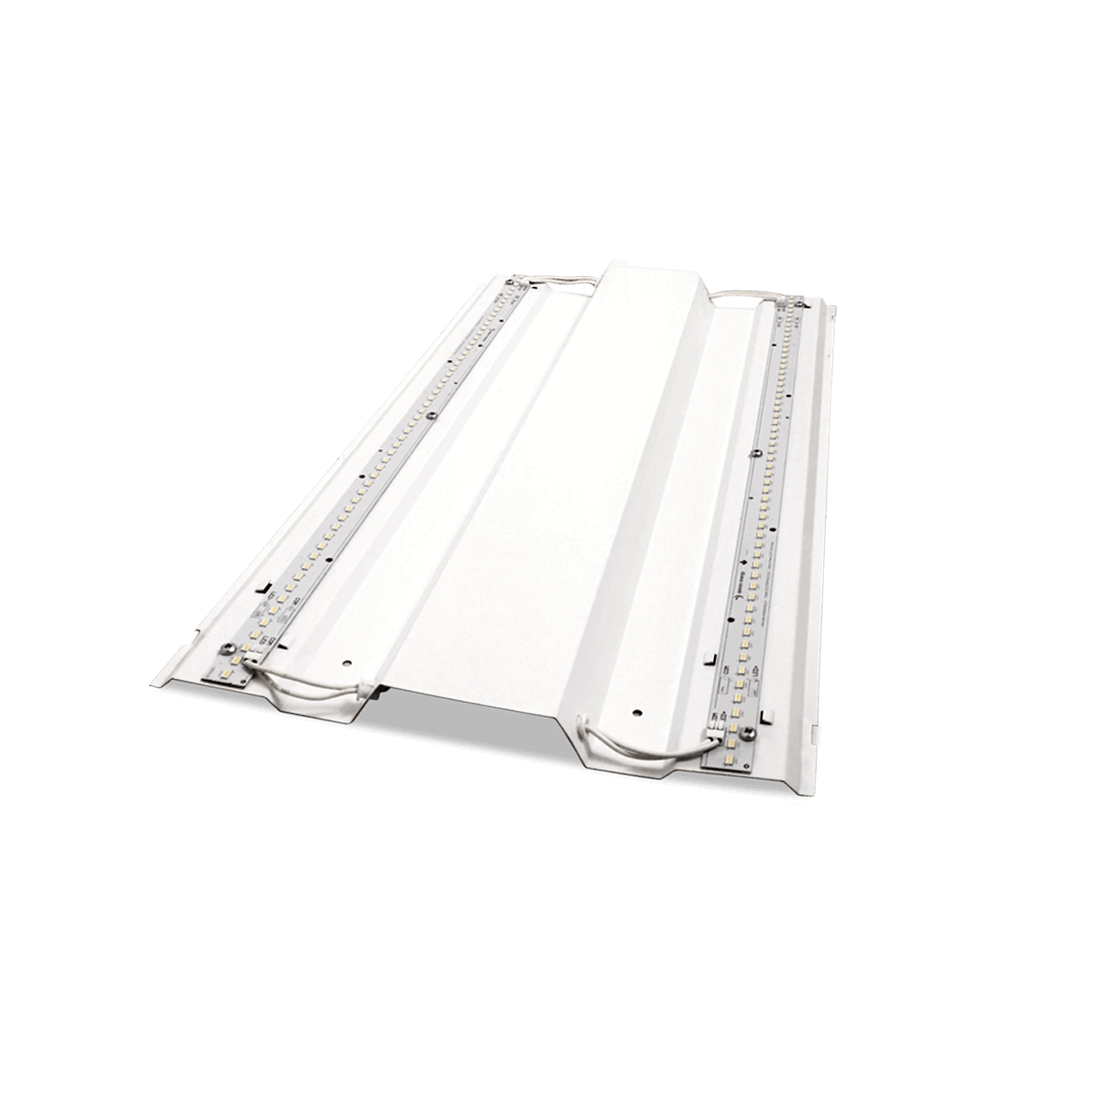 2x2 LED troffer retrofit style fixture with exposed LED boards